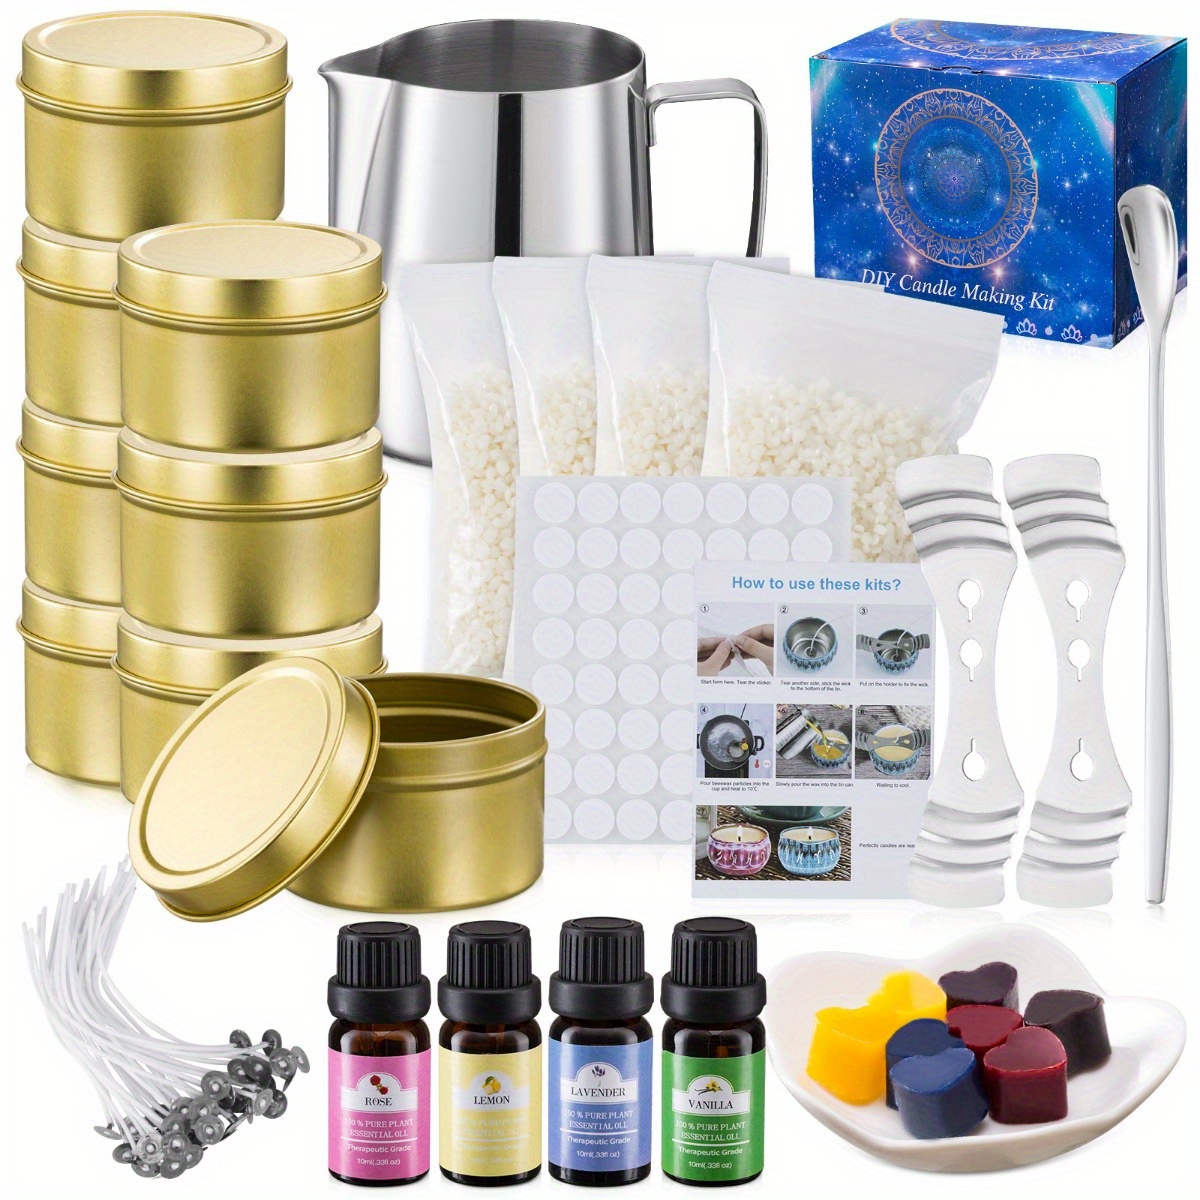 DIY Scented Candle Making Kit DIY Candle Supplies Gift Set Candle